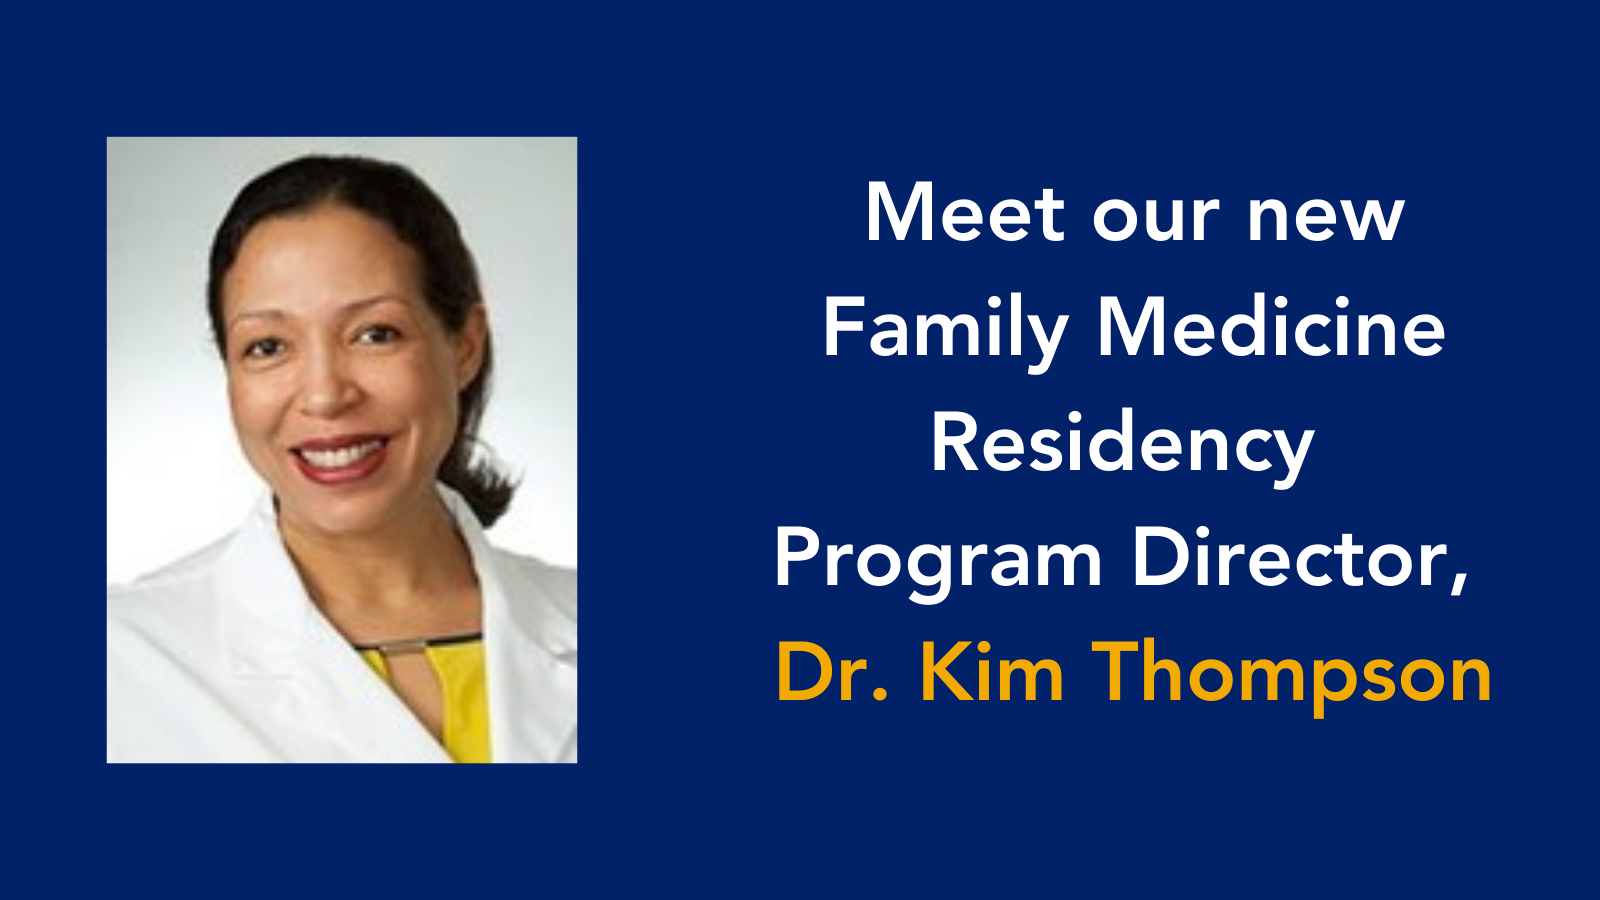 Dr. Kim Thompson and the words "Meet our new Family Medicine Residency Program Director"